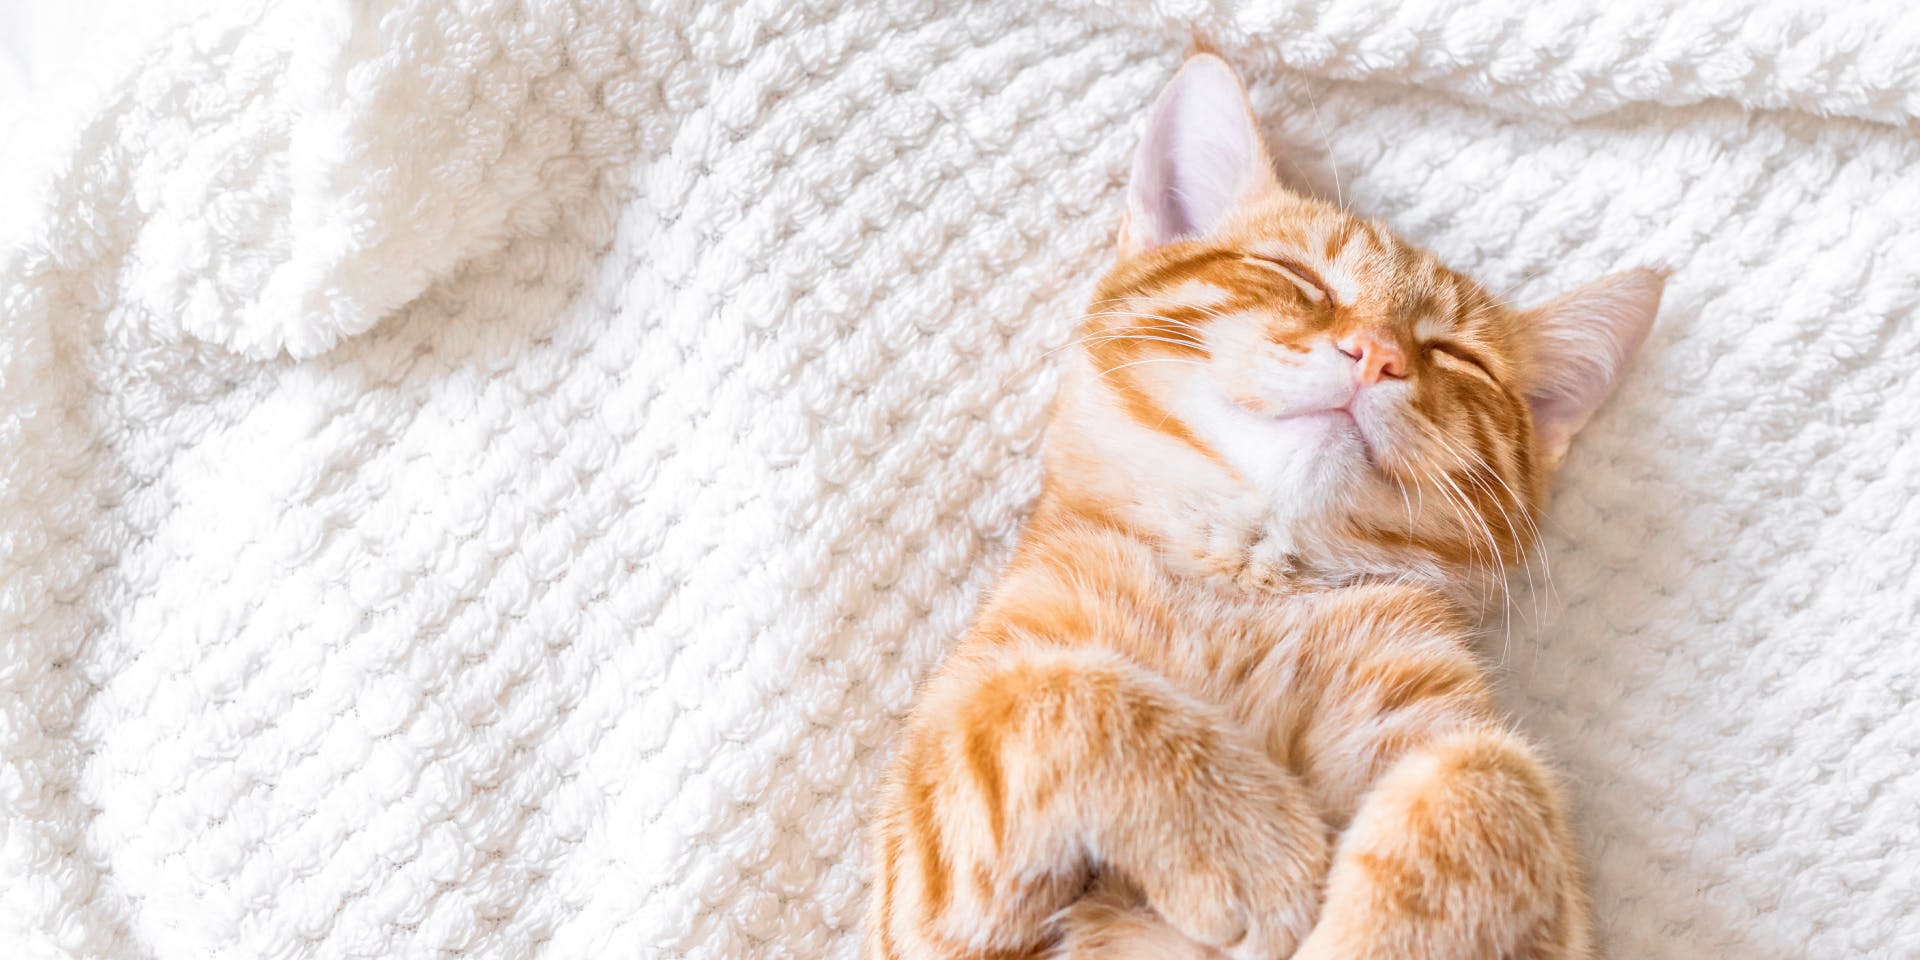 A ginger cat sleeping on a white blanket.